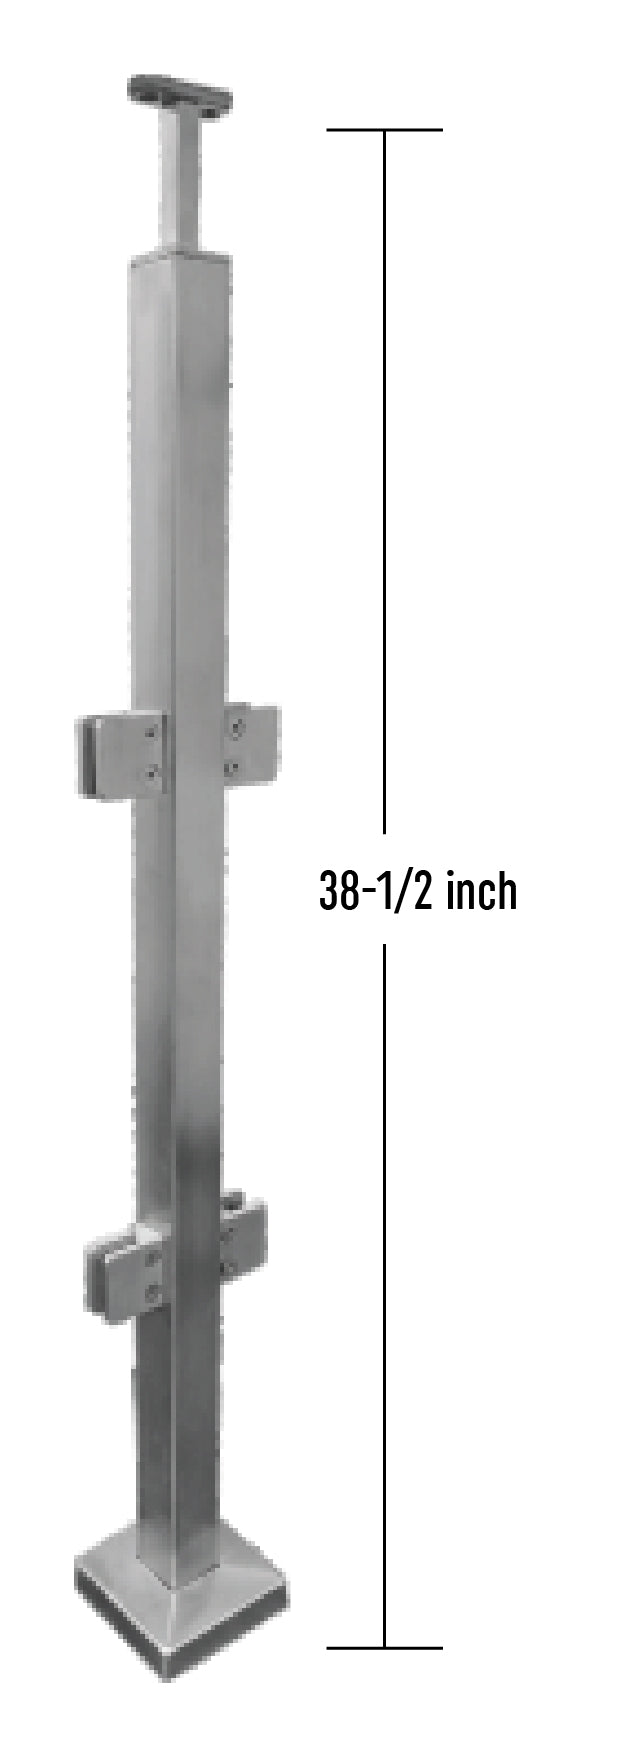 IPSQ40S42L316 Square Stainless Steel Post Inline 42" SS316